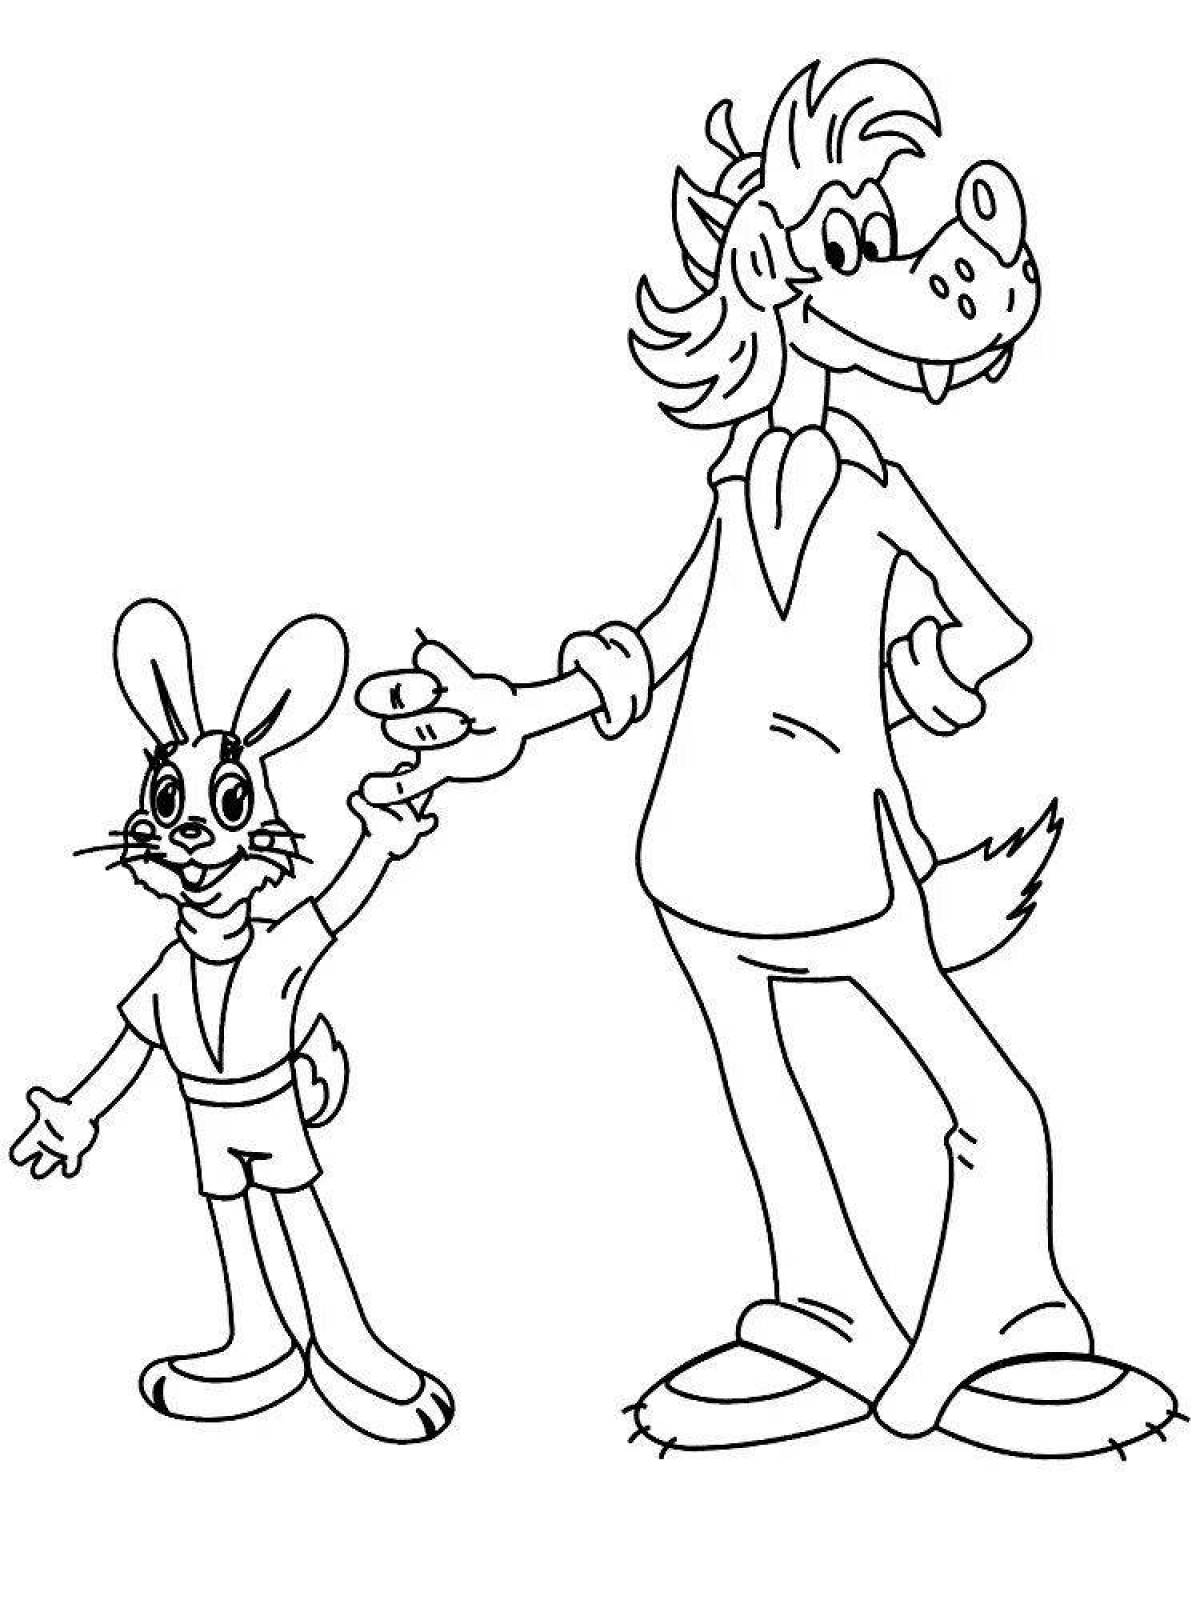 Coloring page funny rabbit